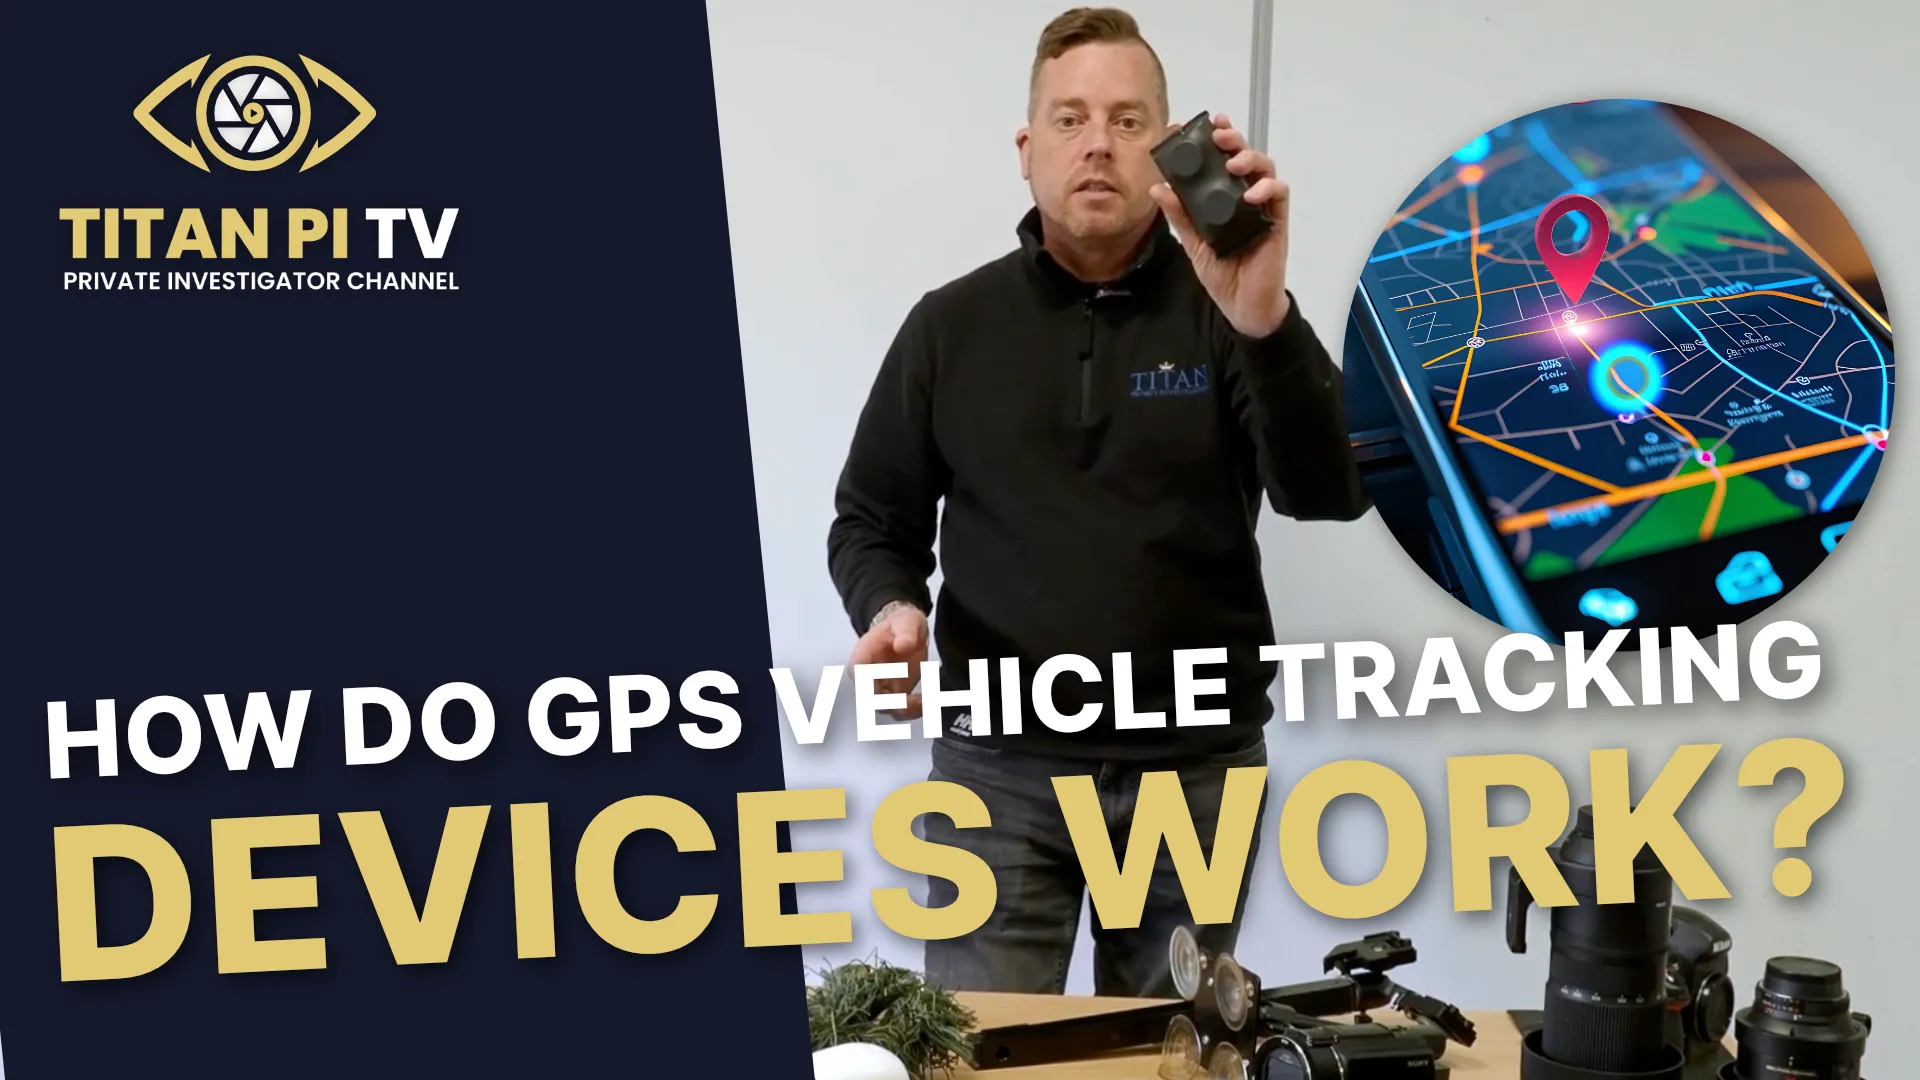 How do GPS Vehicle Tracking devices work? Episode 56 | Titan PI TV